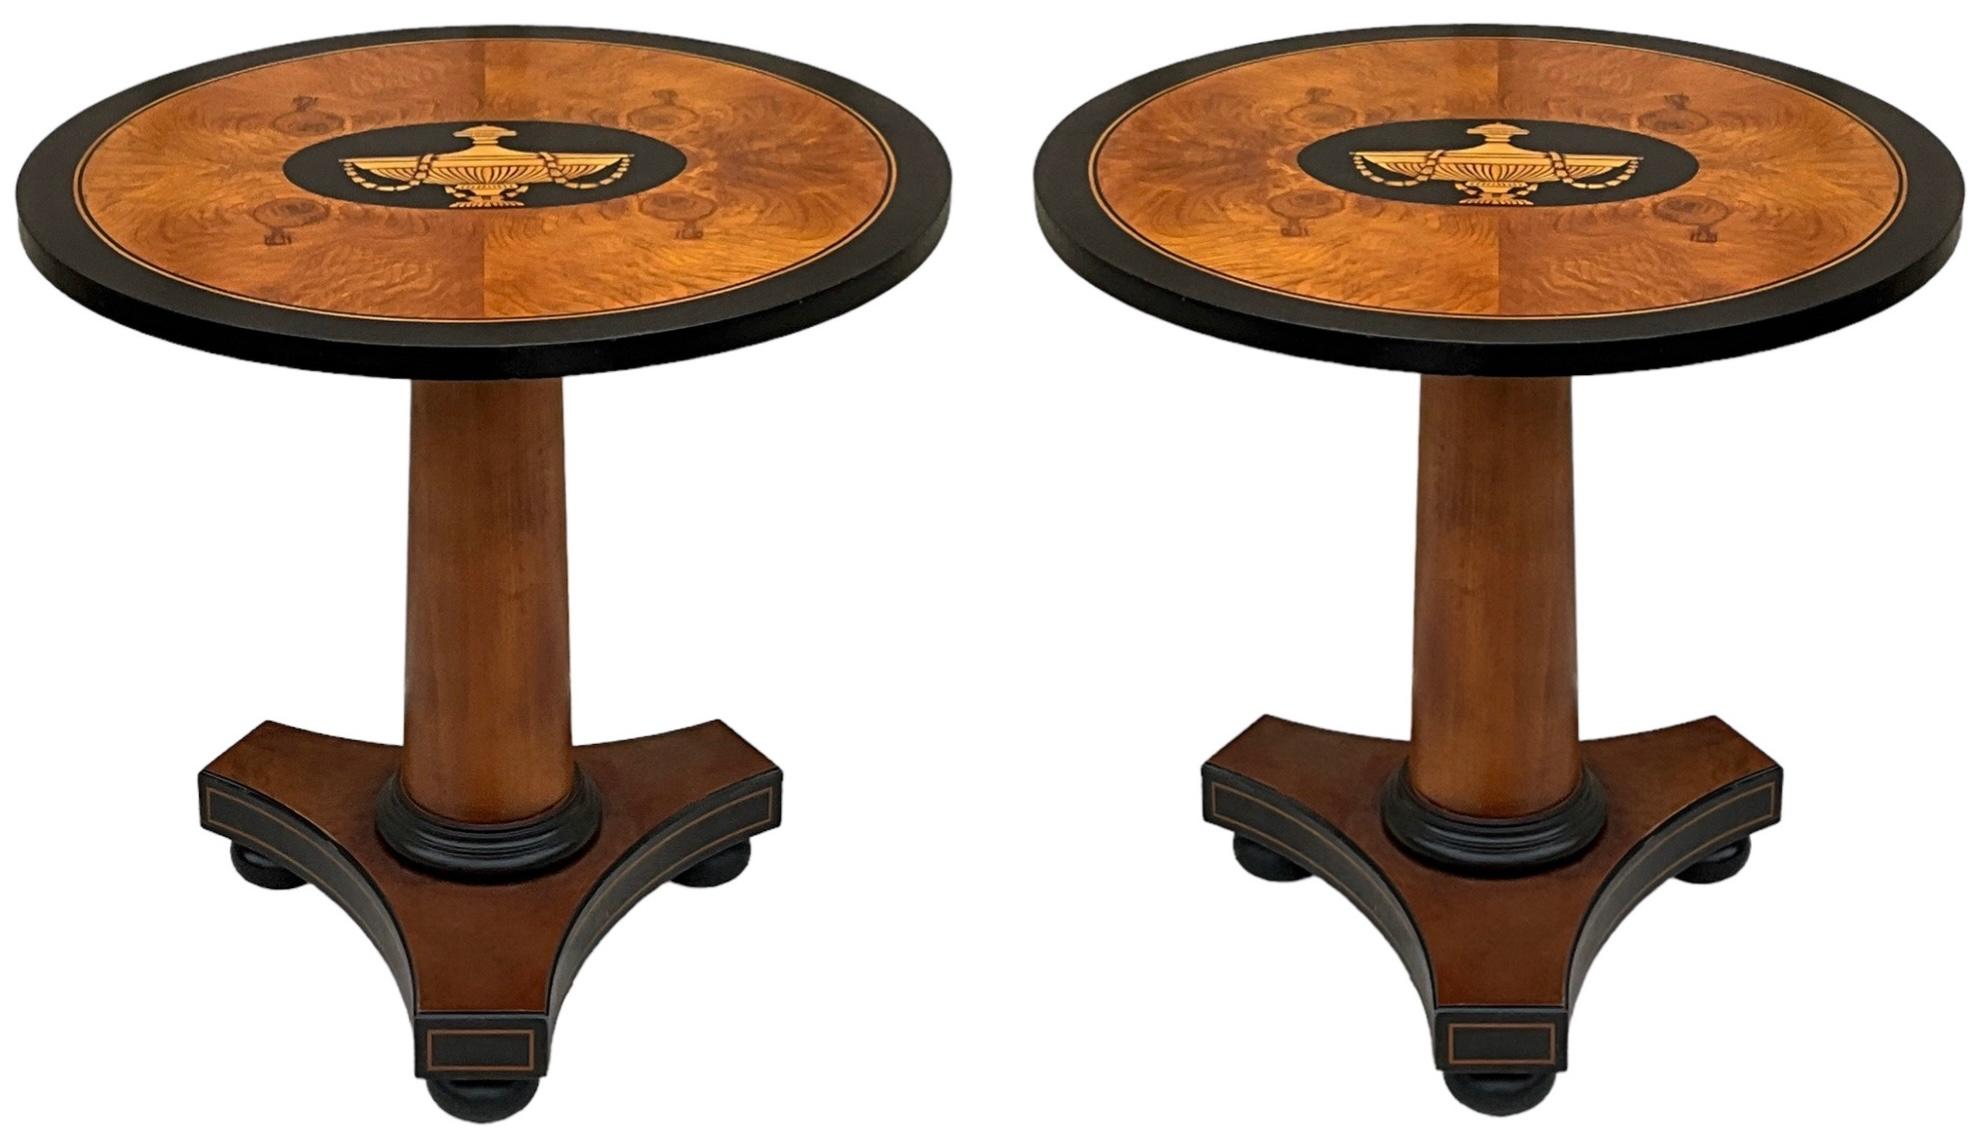 Italian Neo-Classical & Biedermeir Style Burlwood & Ebonized Side Tables - Pair  In Good Condition For Sale In Kennesaw, GA